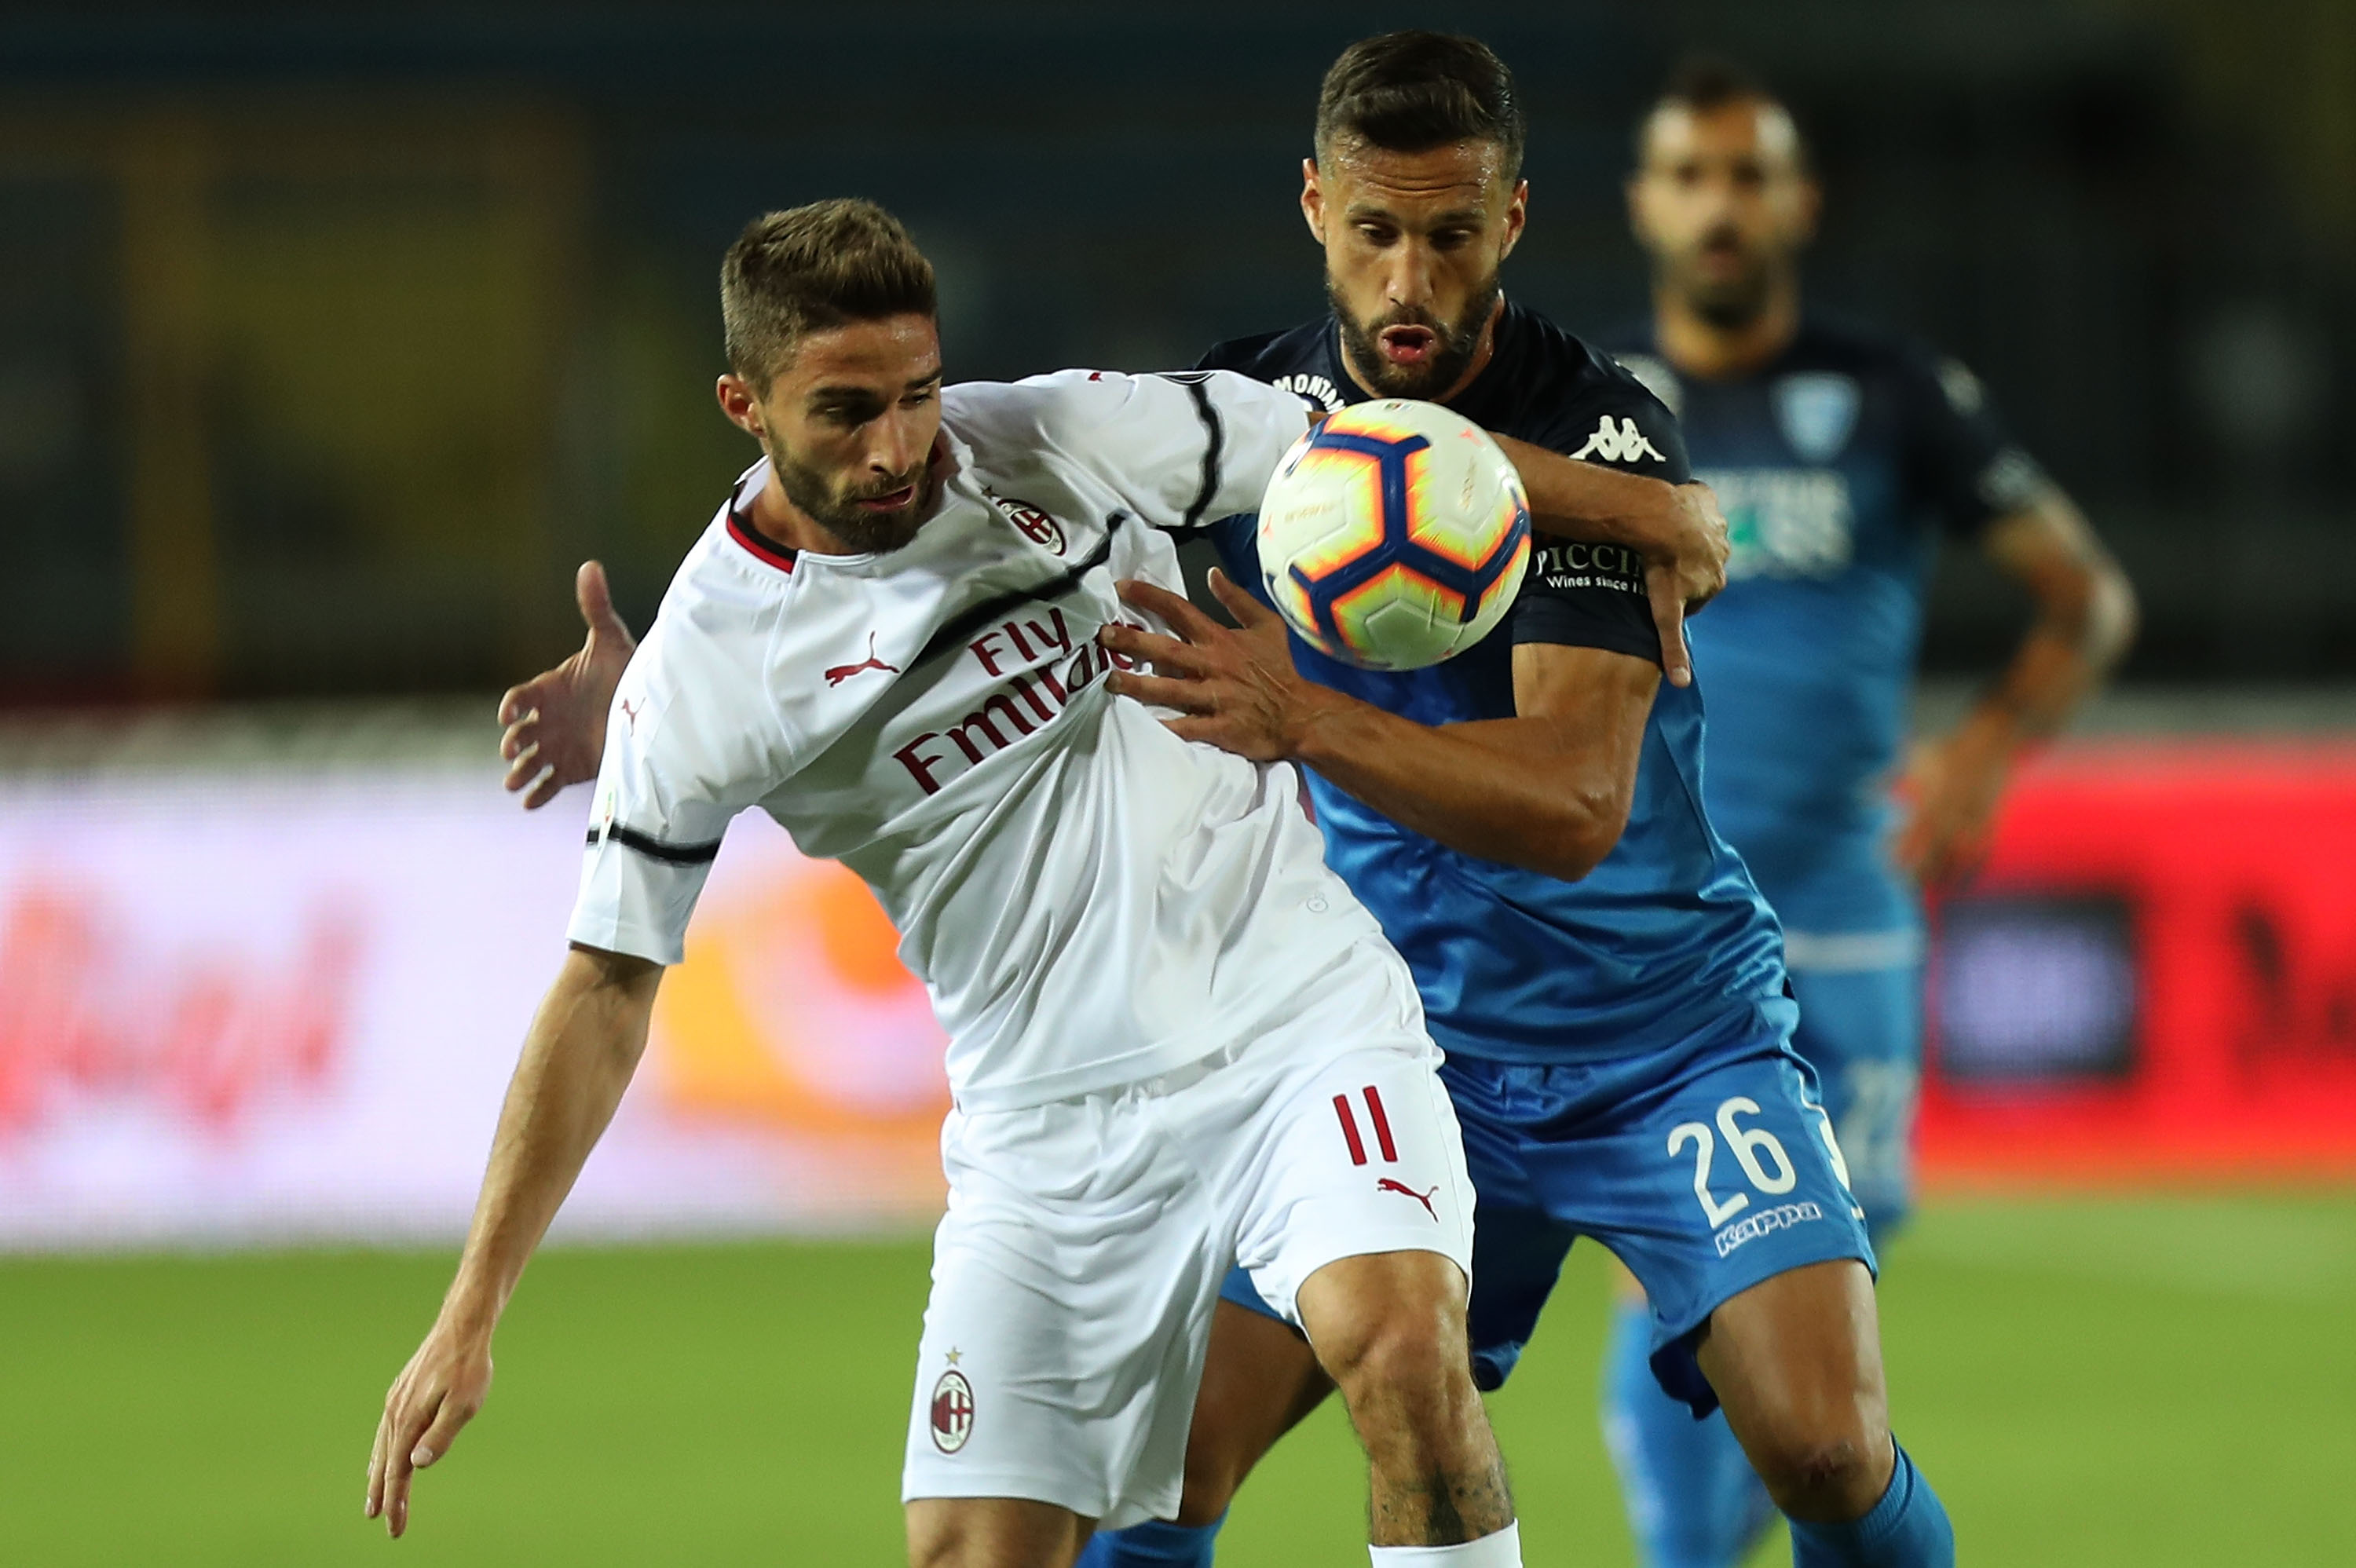 EMPOLI, ITALY - SEPTEMBER 27: Matias Silvestre of Empoli FC fights for the ball with Fabio Borini of AC Milan during the serie A match between Empoli and AC Milan at Stadio Carlo Castellani on September 27, 2018 in Empoli, Italy. (Photo by Gabriele Maltinti/Getty Images)